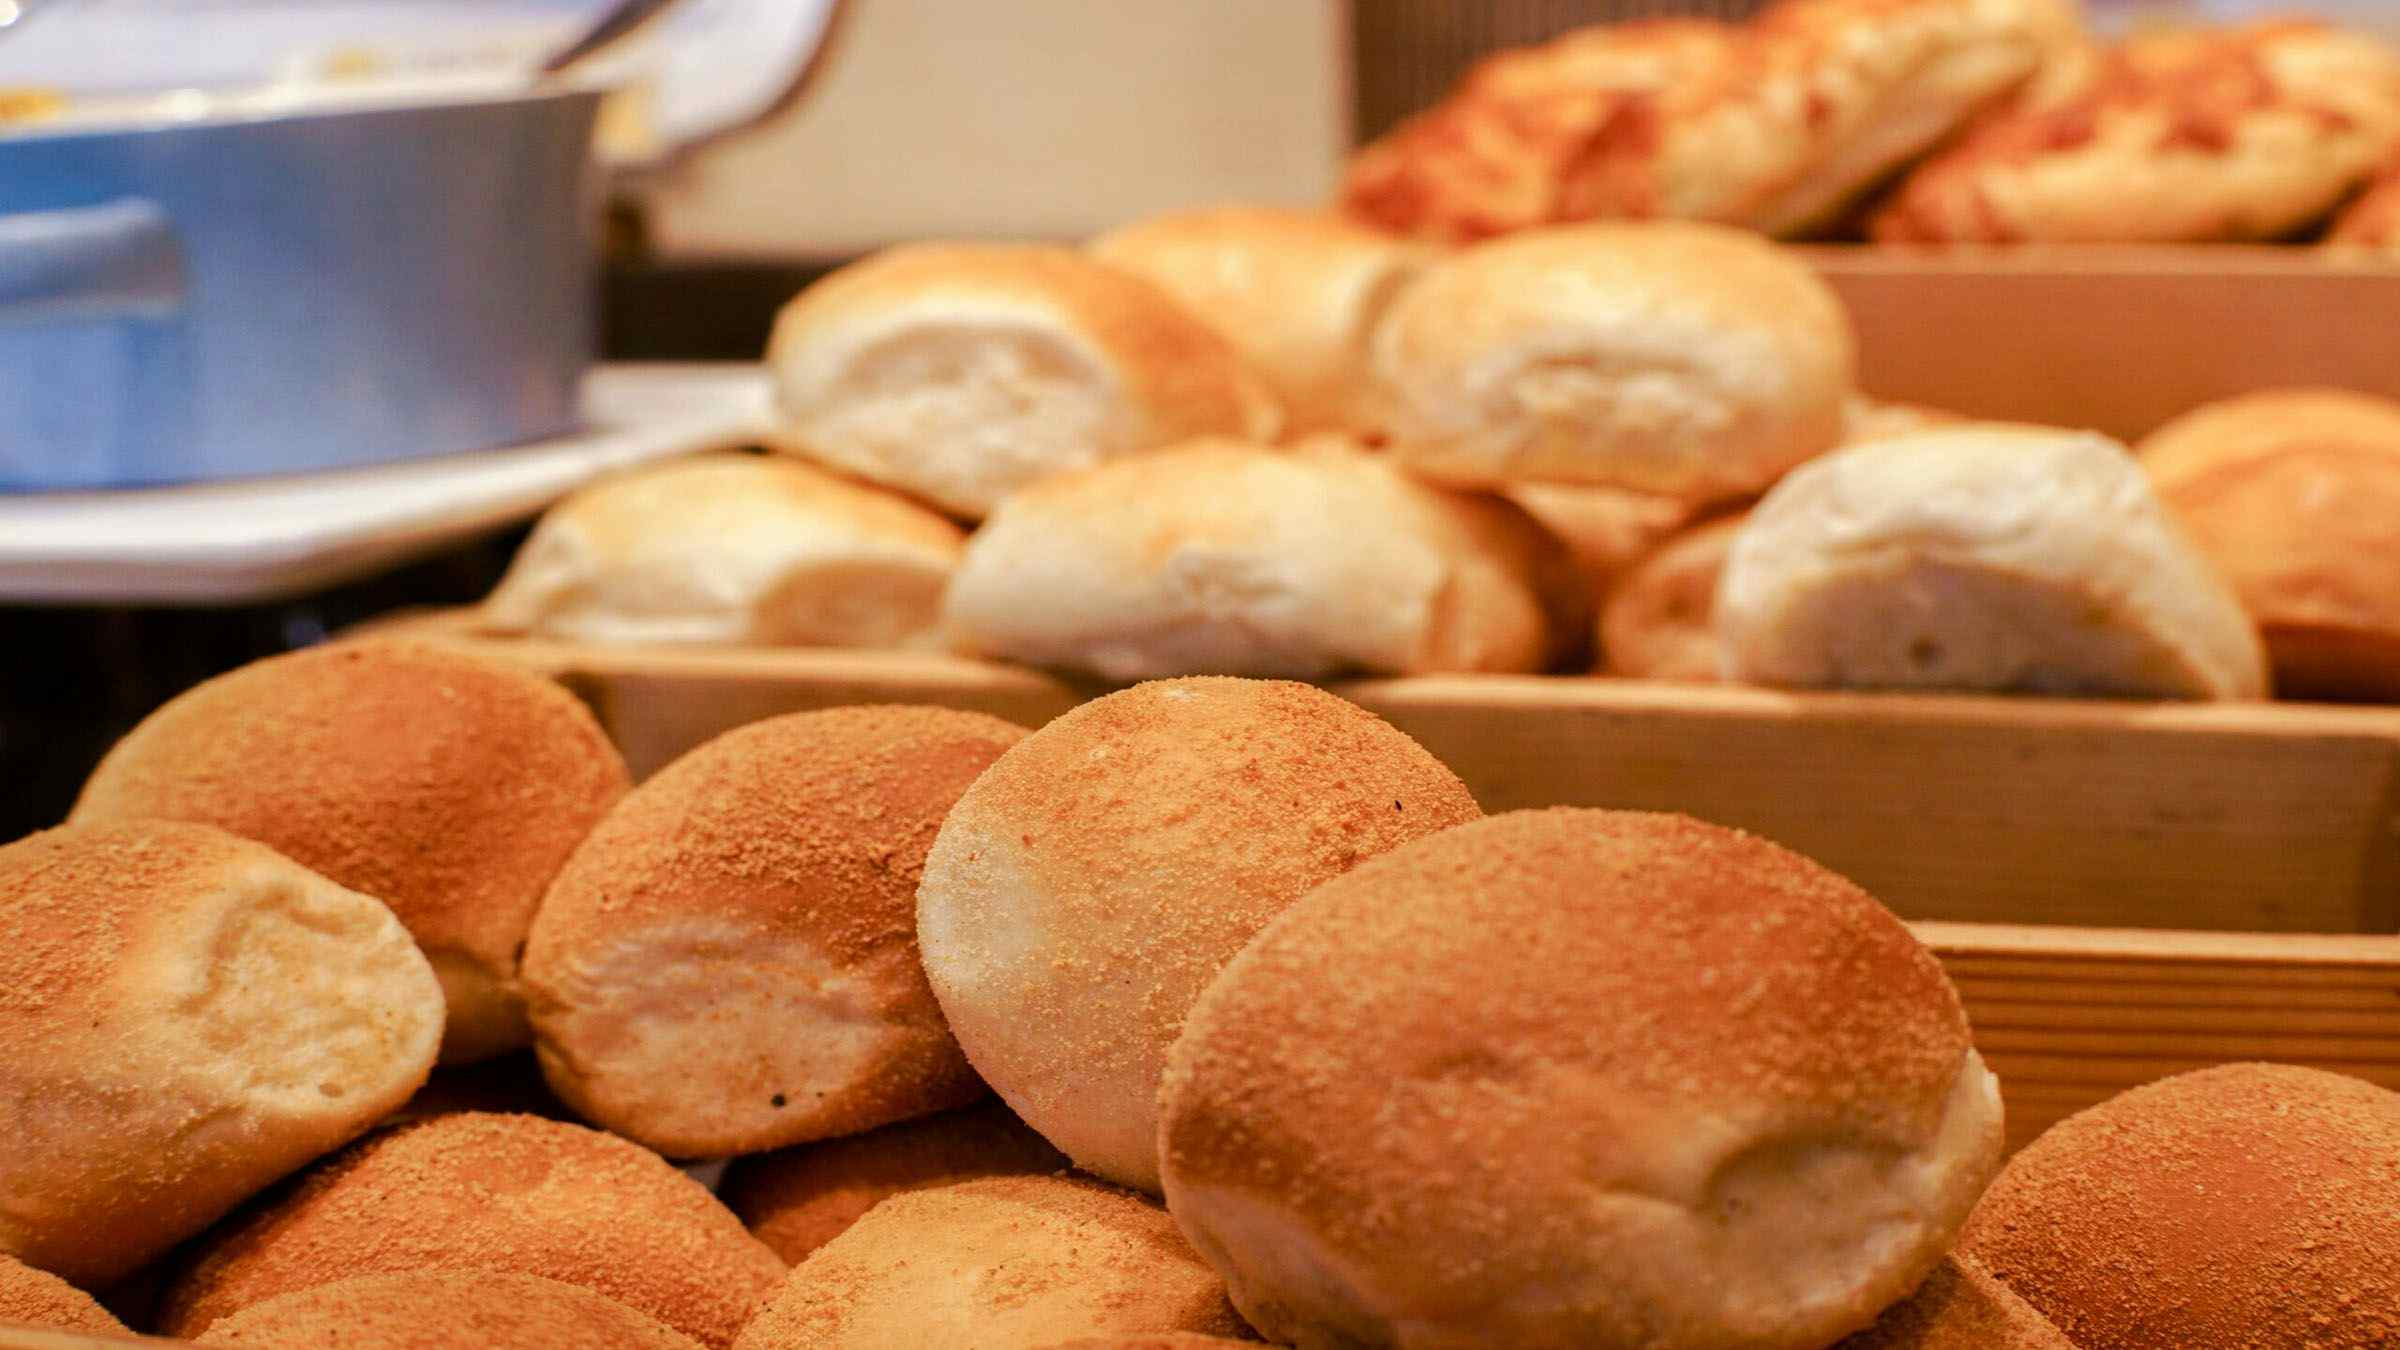 DTI studies price hikes for pandesal and 'tasty'